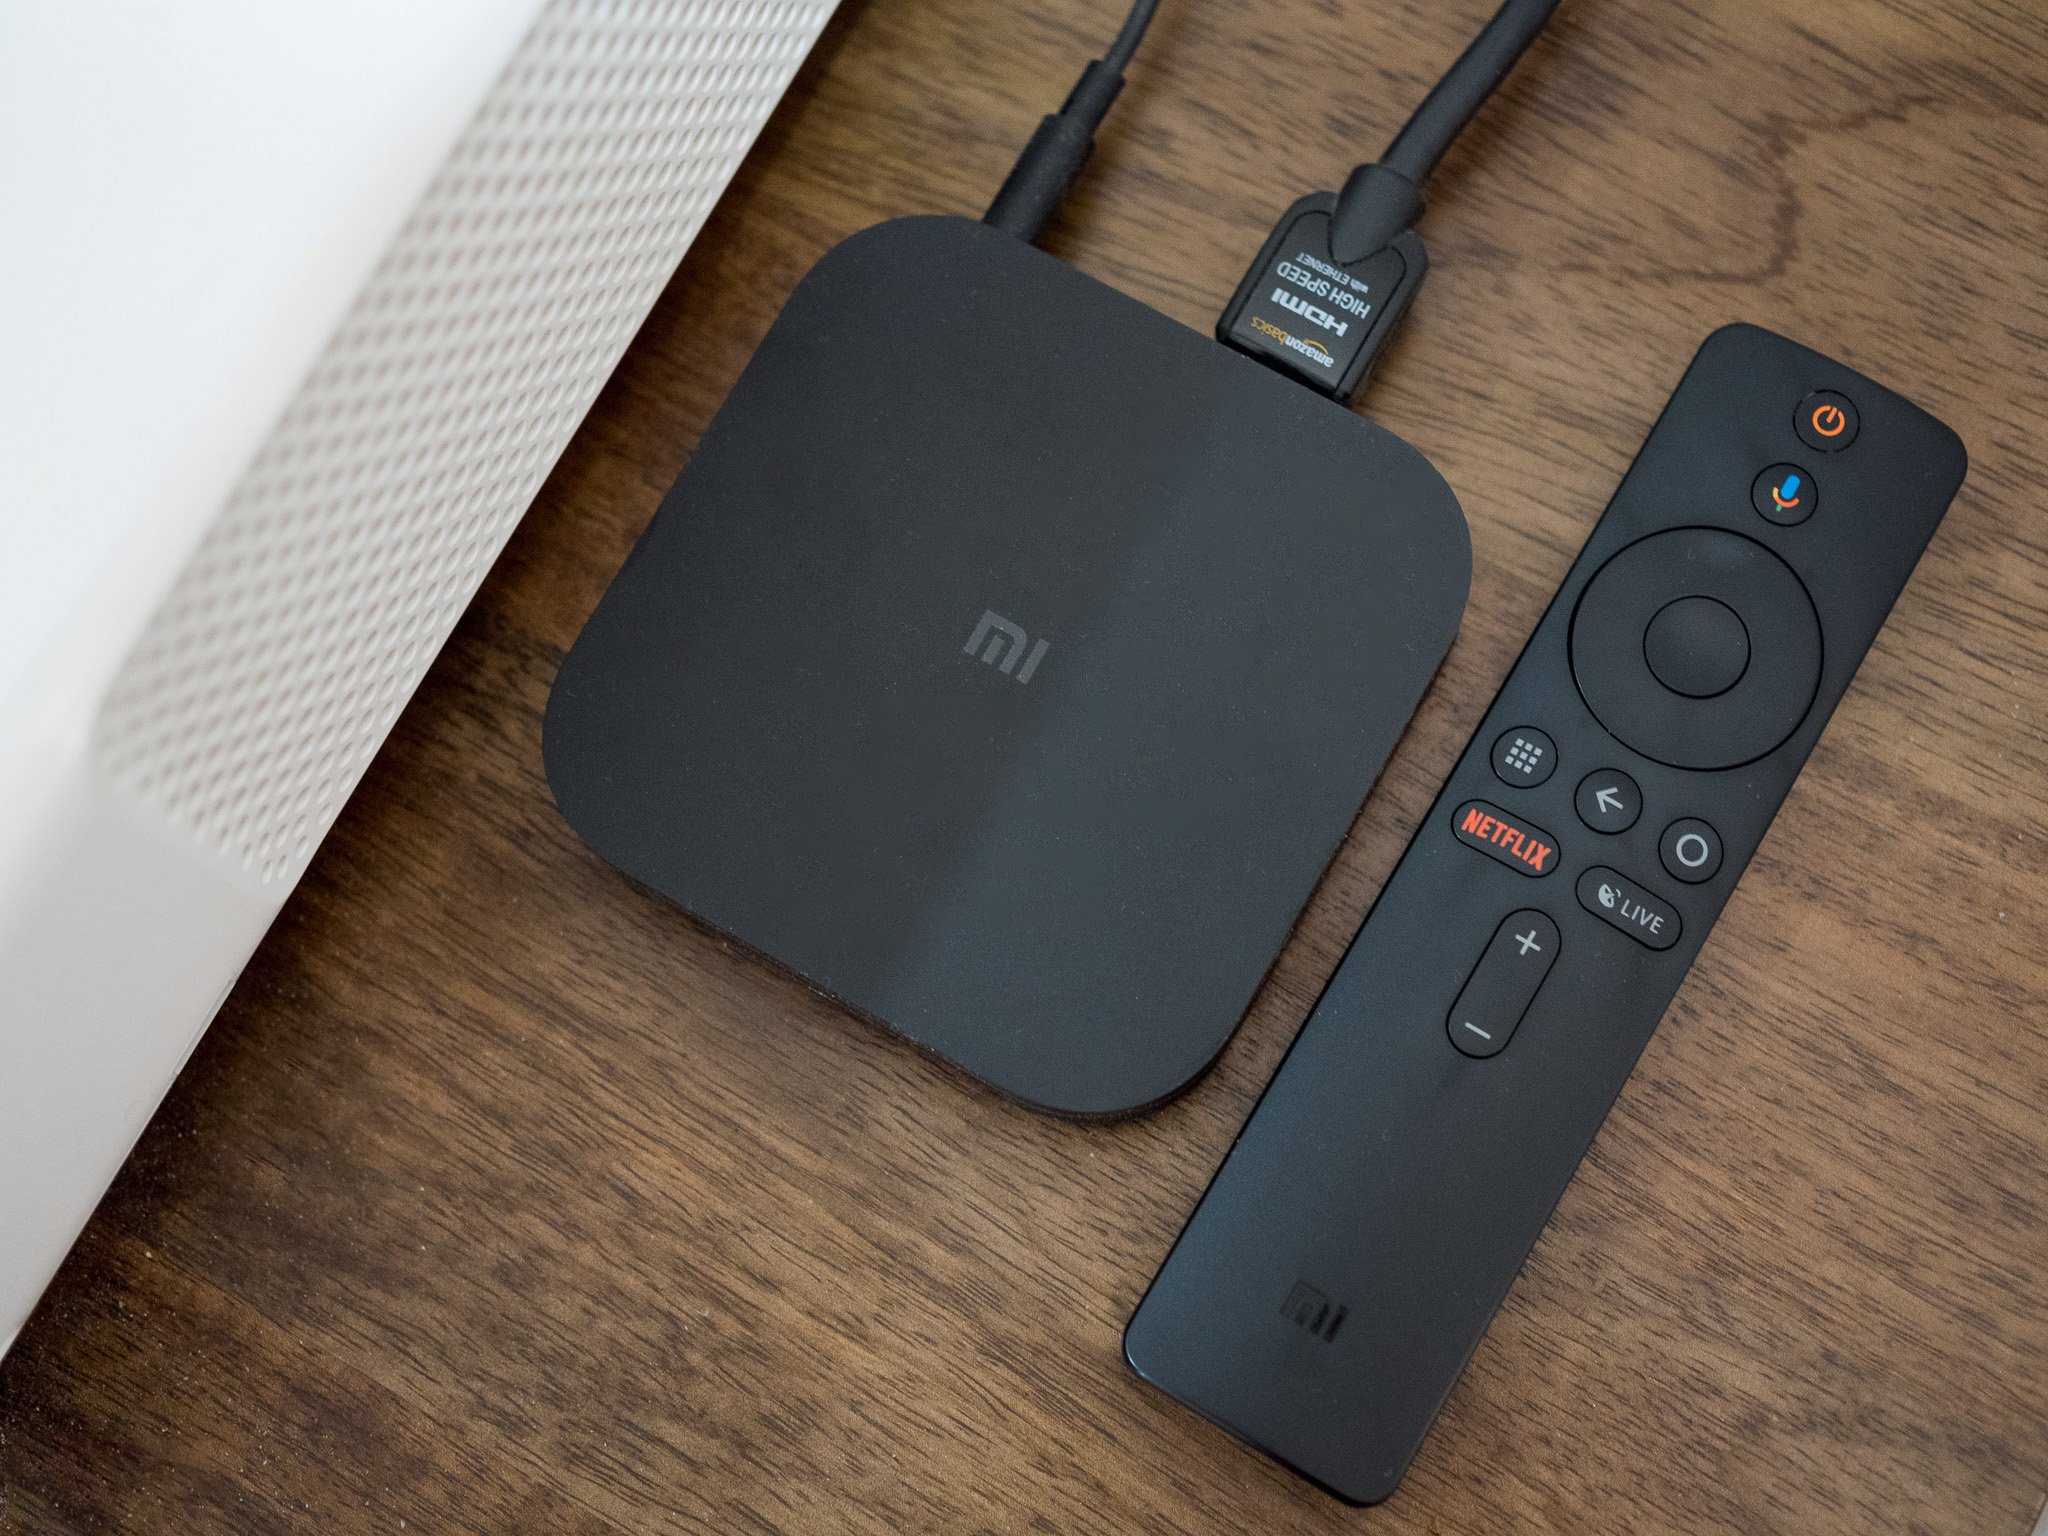 Xiaomi Mi Box 4S Pro is an 8K Android TV box that costs just $50 in China